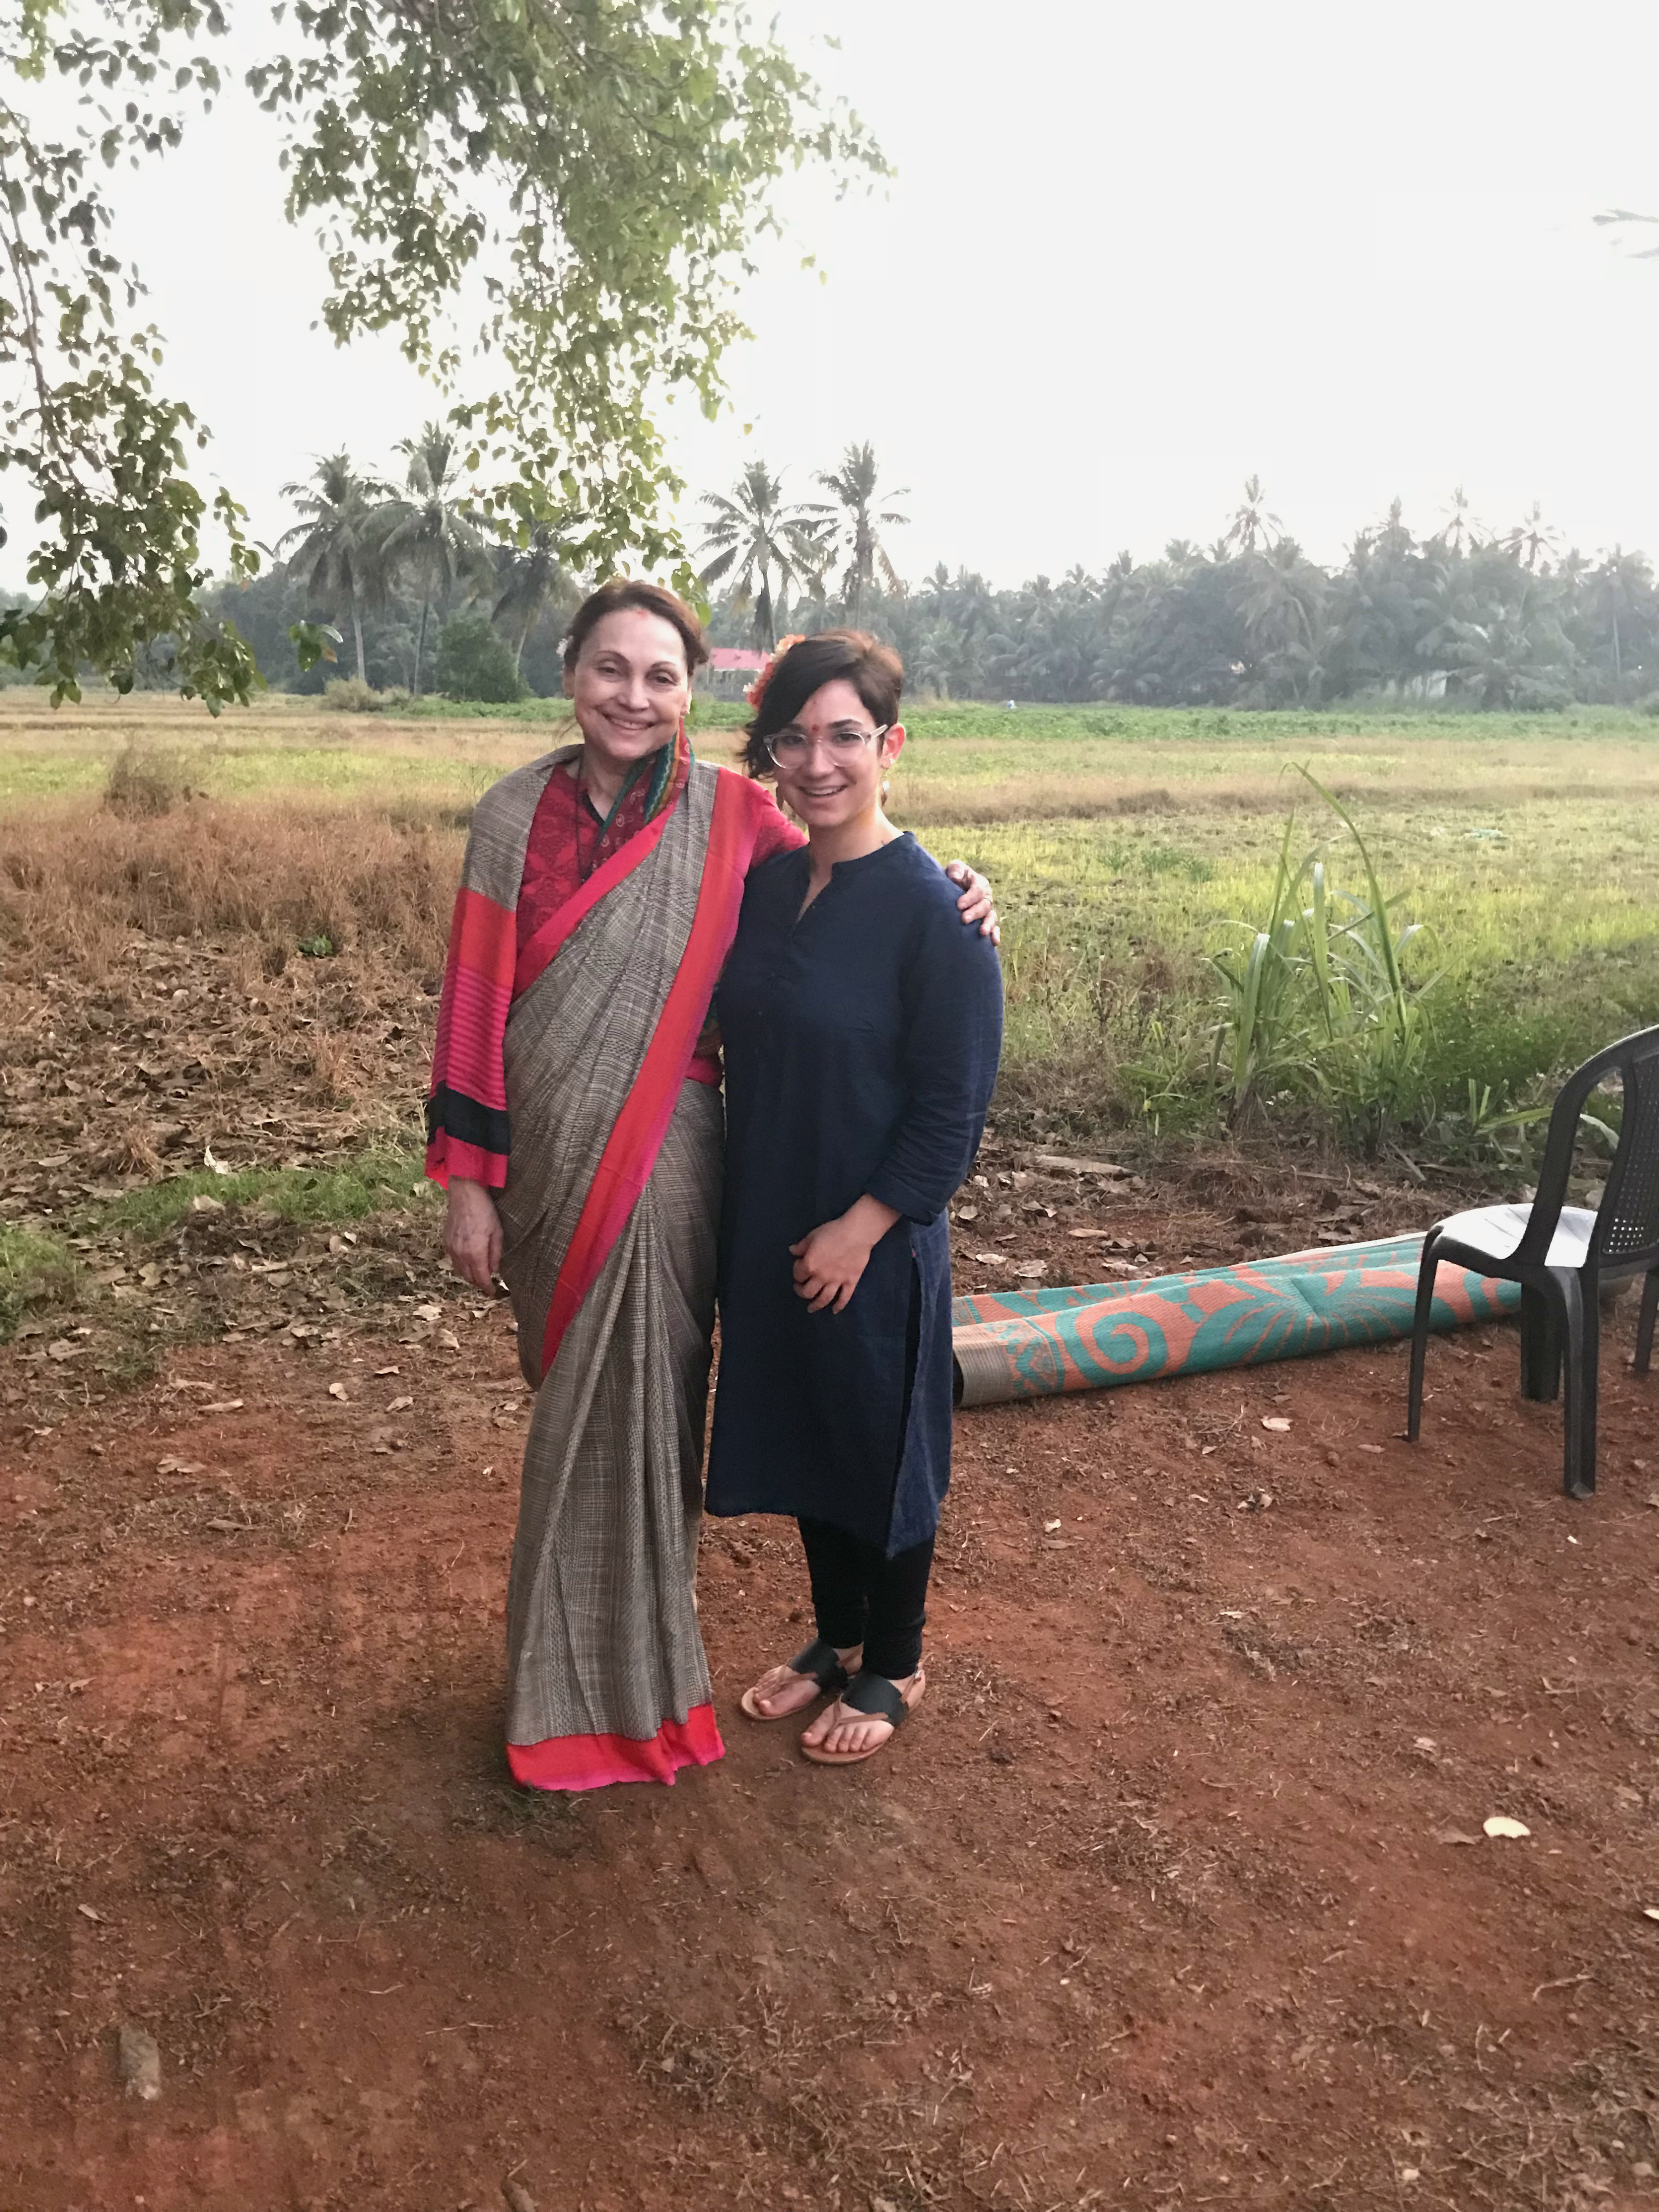 Taking a break during a research project in India, Femida Handy and Allison Russell stand in a field.